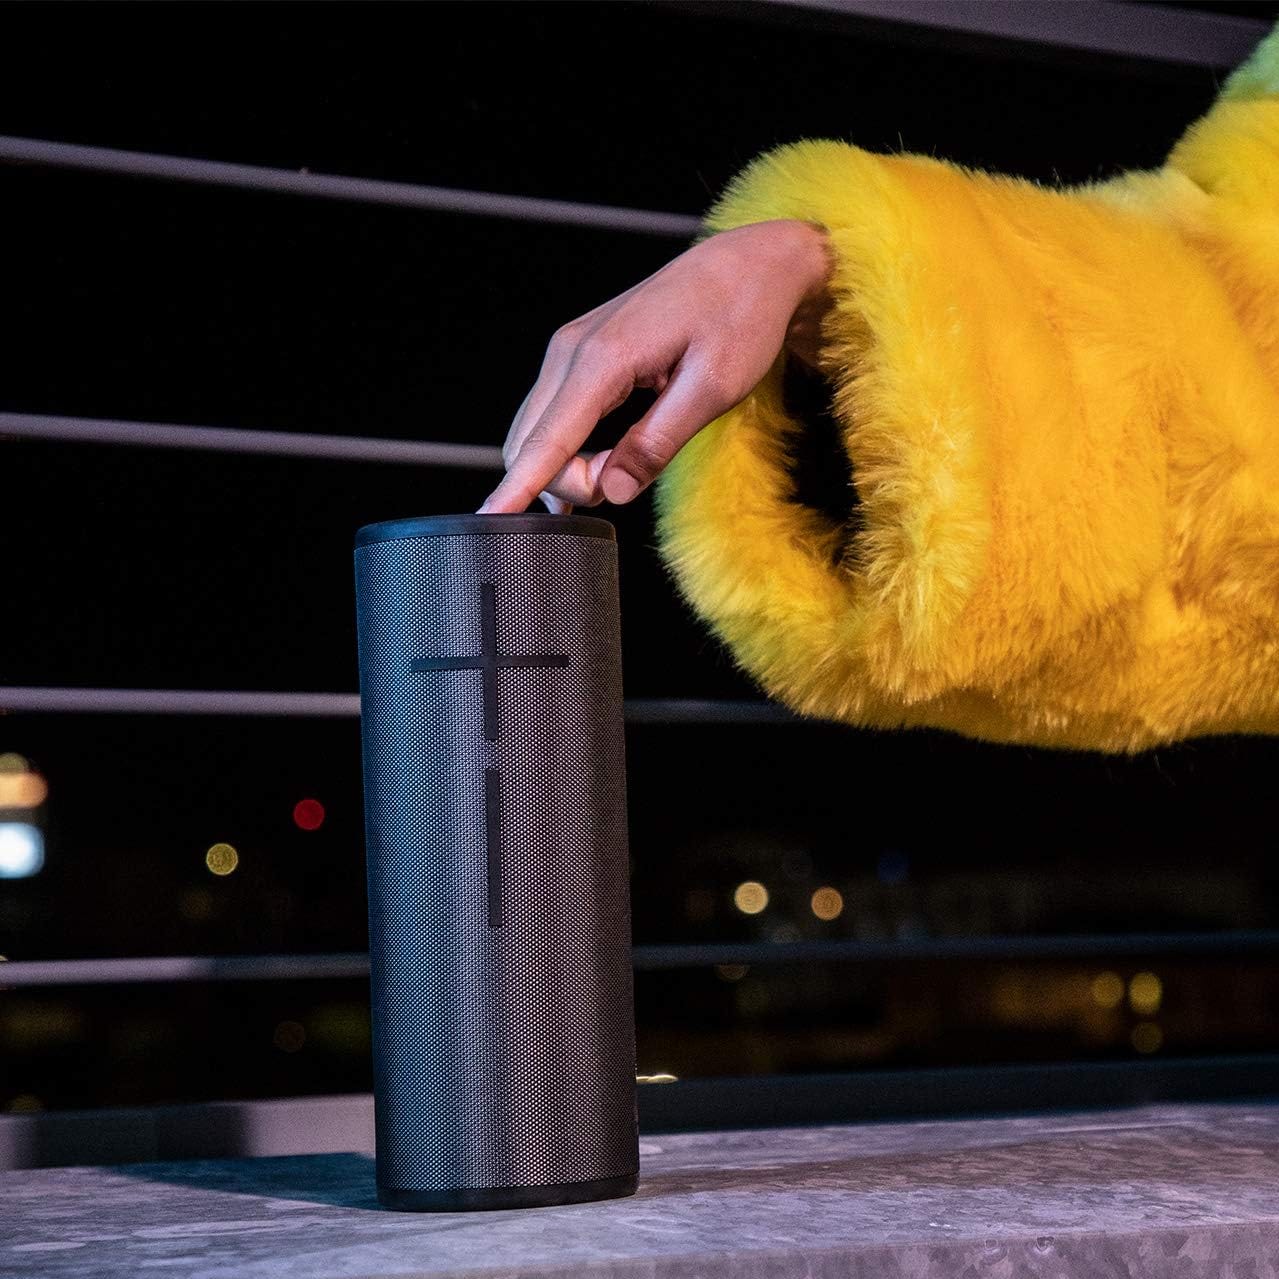 A person in a yellow coat is adjusting a black cylindrical portable speaker on a ledge at night.